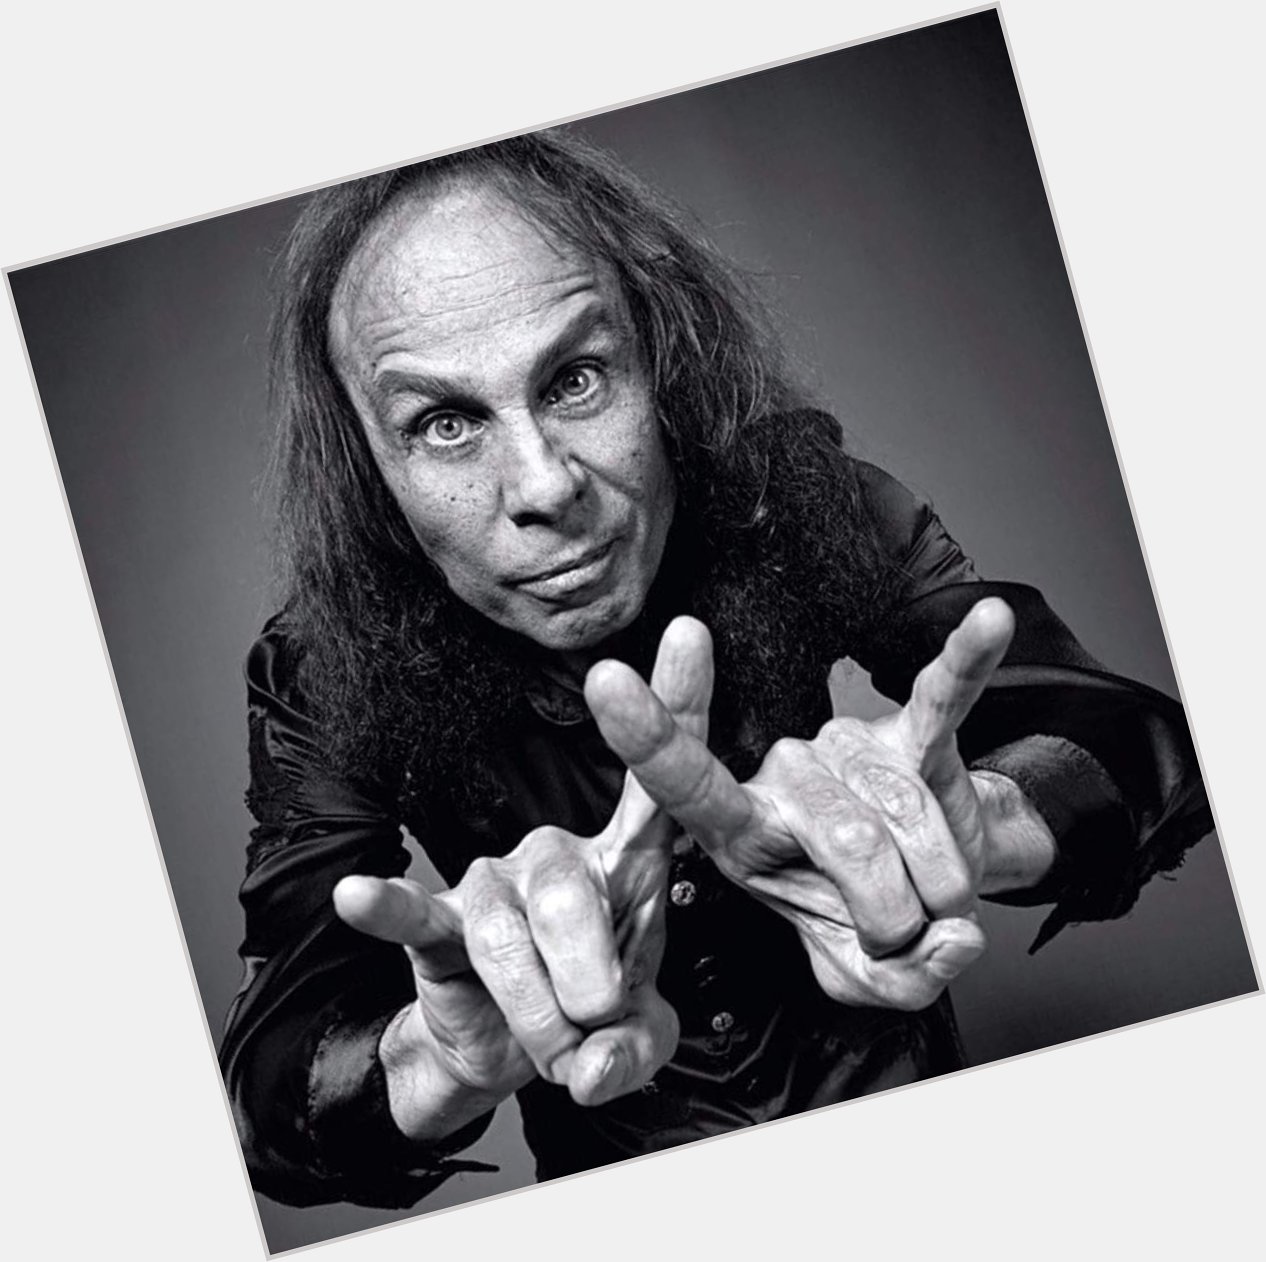 Today, Ronnie James Dio would have been 75. Happy birthday, Ronnie! 